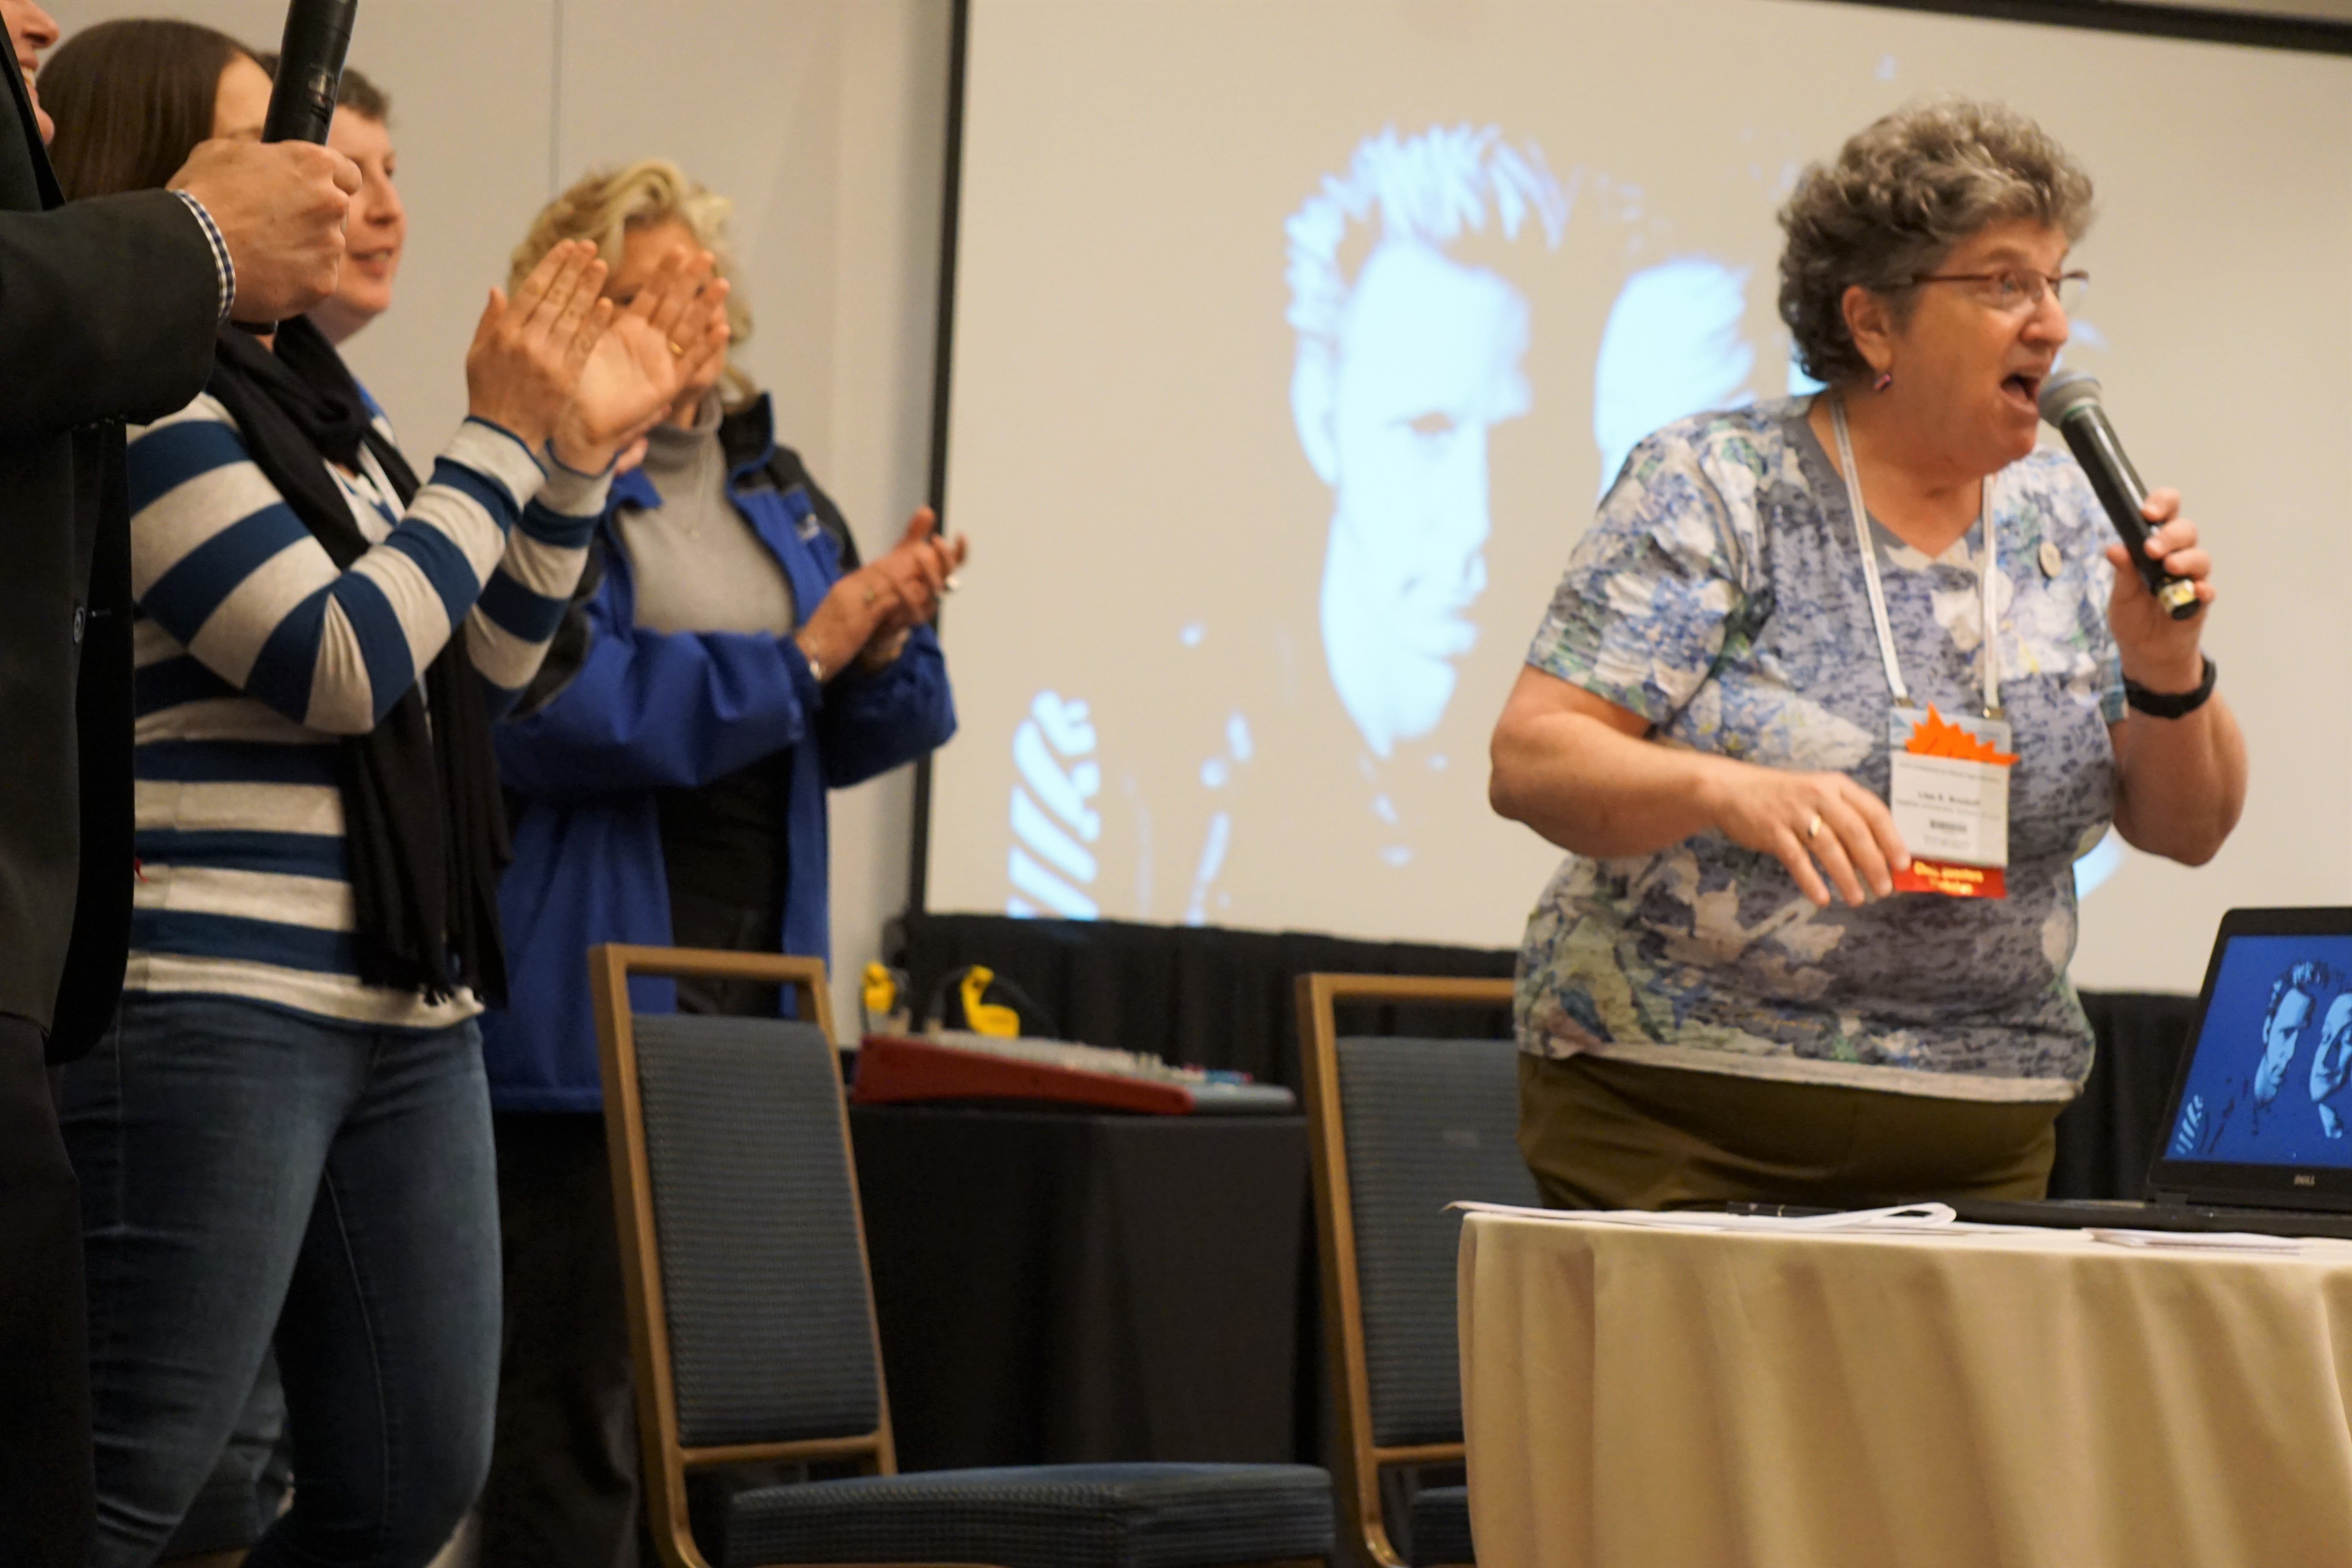 Conference planning committee Chair Lisa Brodoff (Seattle Law) leads attendees in a karaoke sing along.